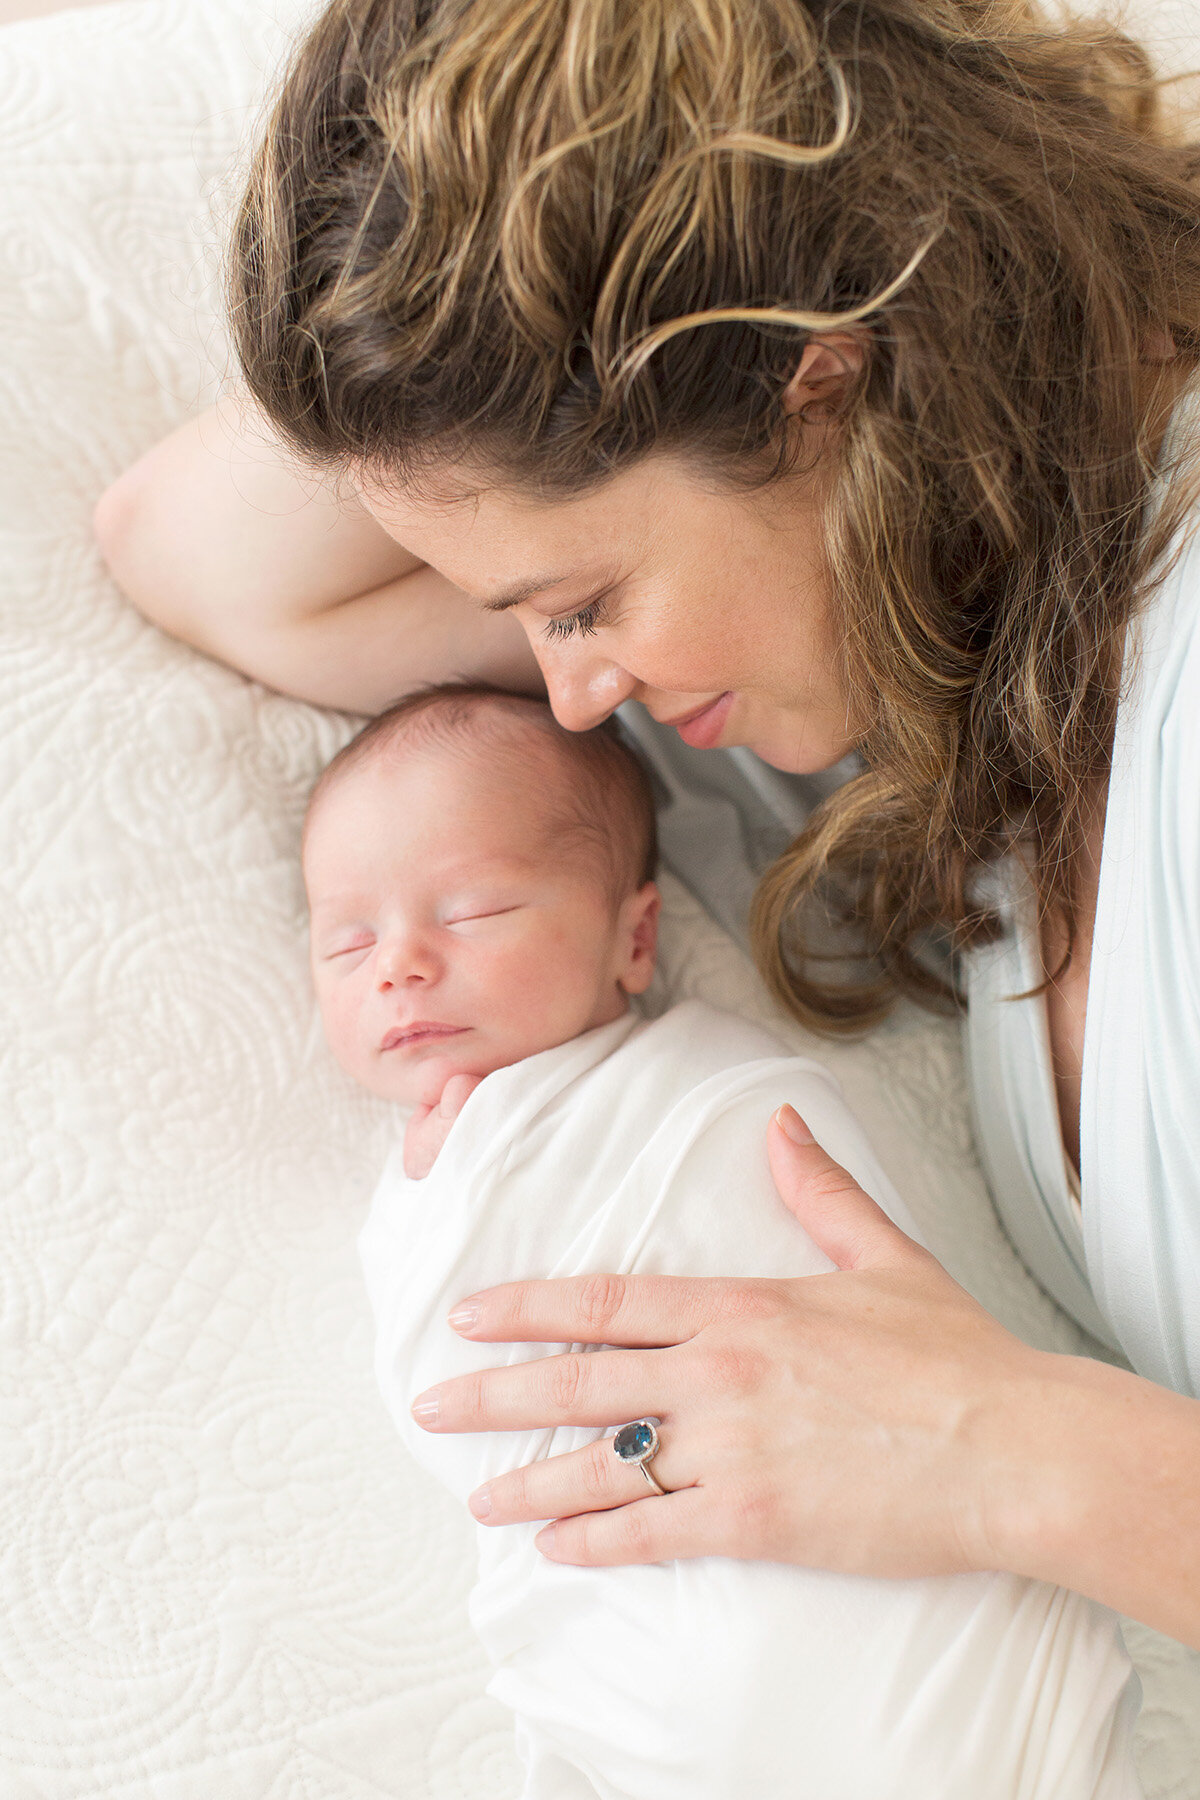 Julie Brock Photography | Newborn Photographer Louisville KY | Lexington KY Newborn Photographer | Maternity Photography Session | Mom with baby on bed.jpg